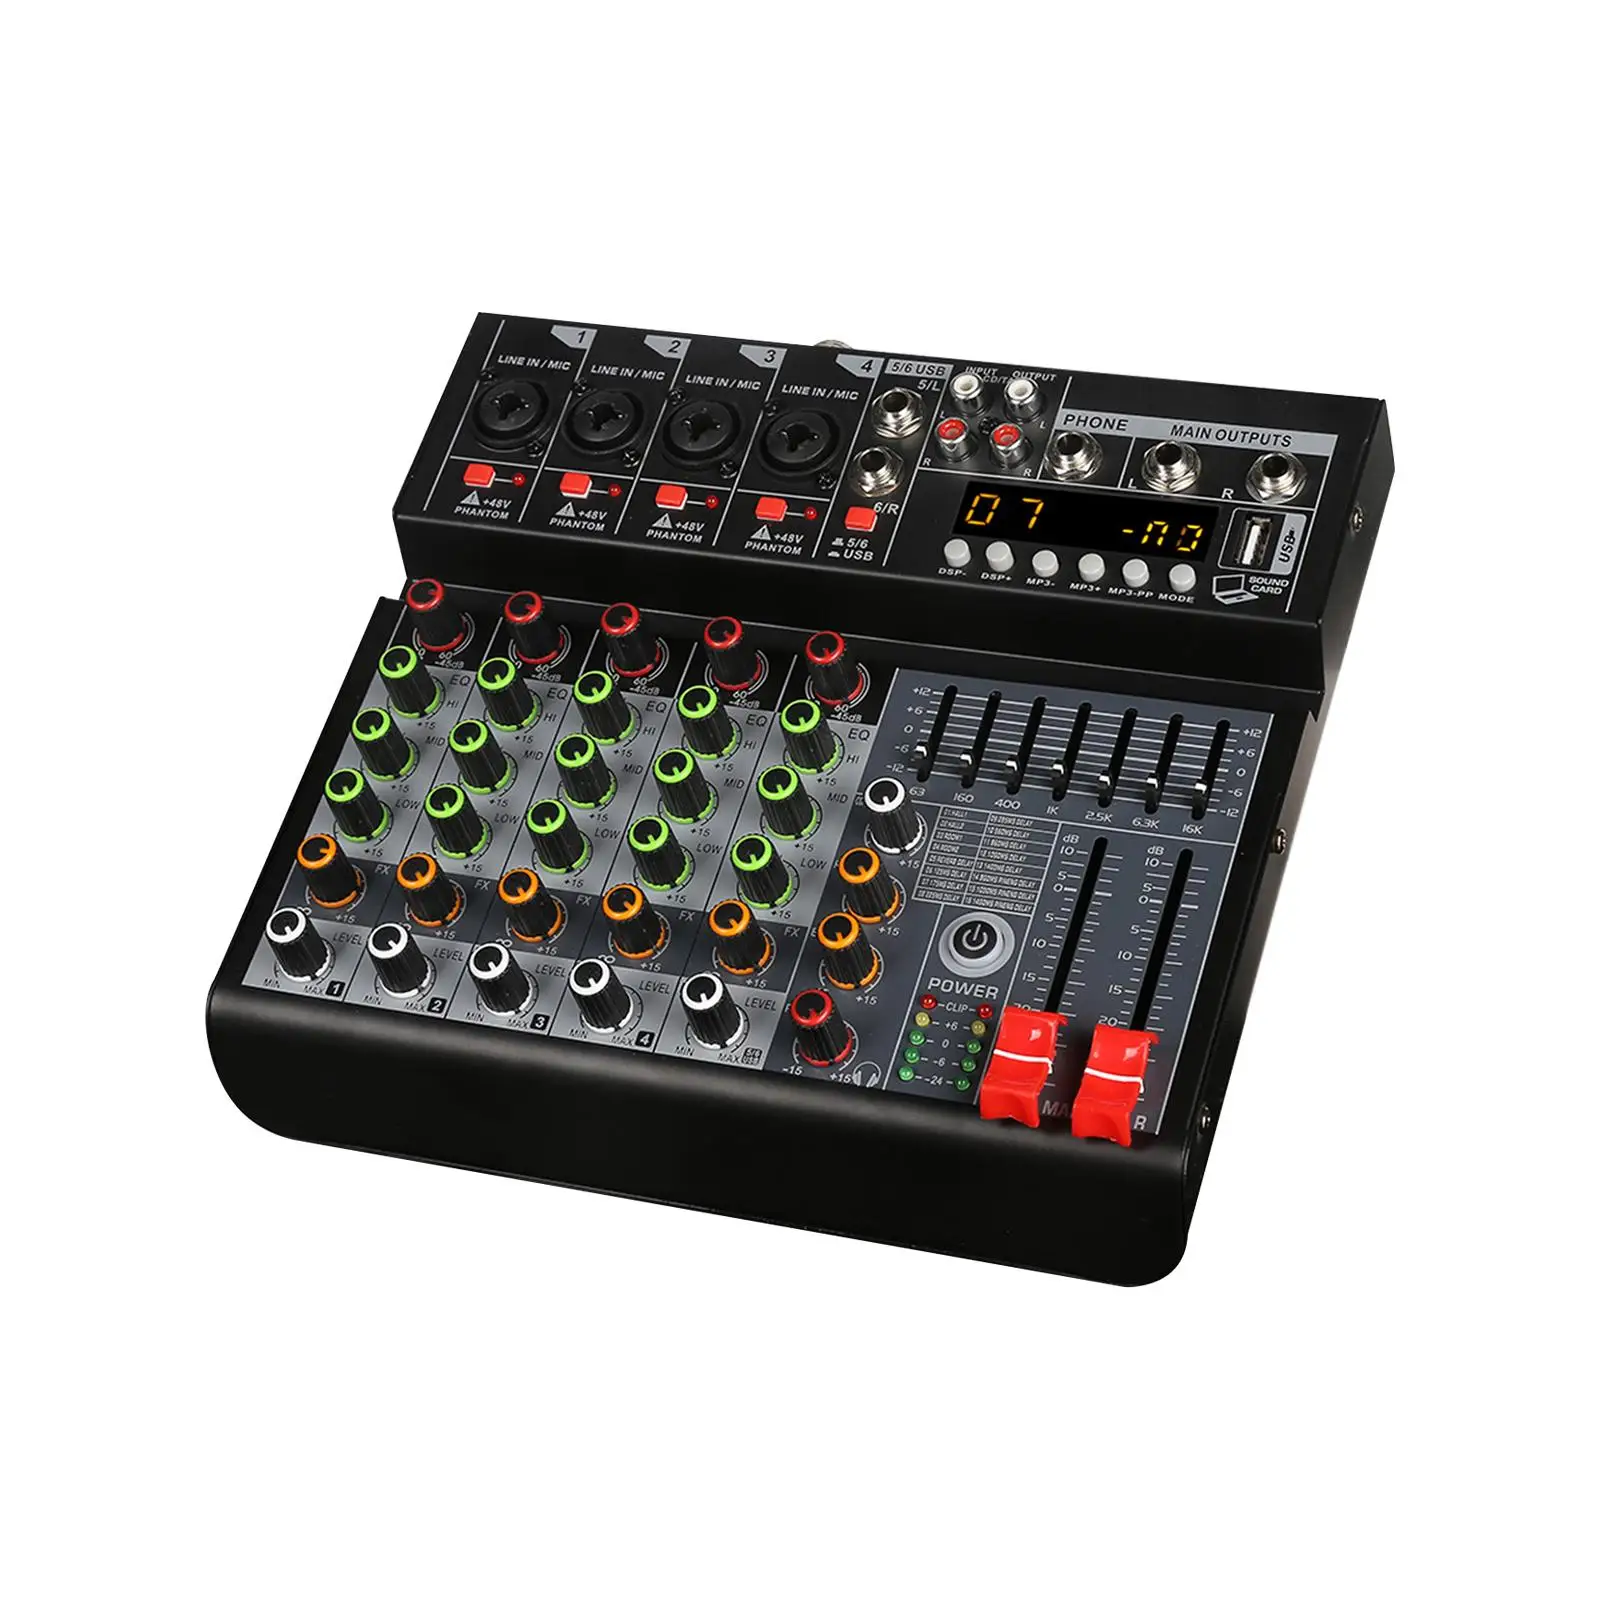 6 Channel Audio Mixer Digital Processor Portable Sound Mixing Console for PC Family KTV Campus Speech Meeting Recording DJ Stage